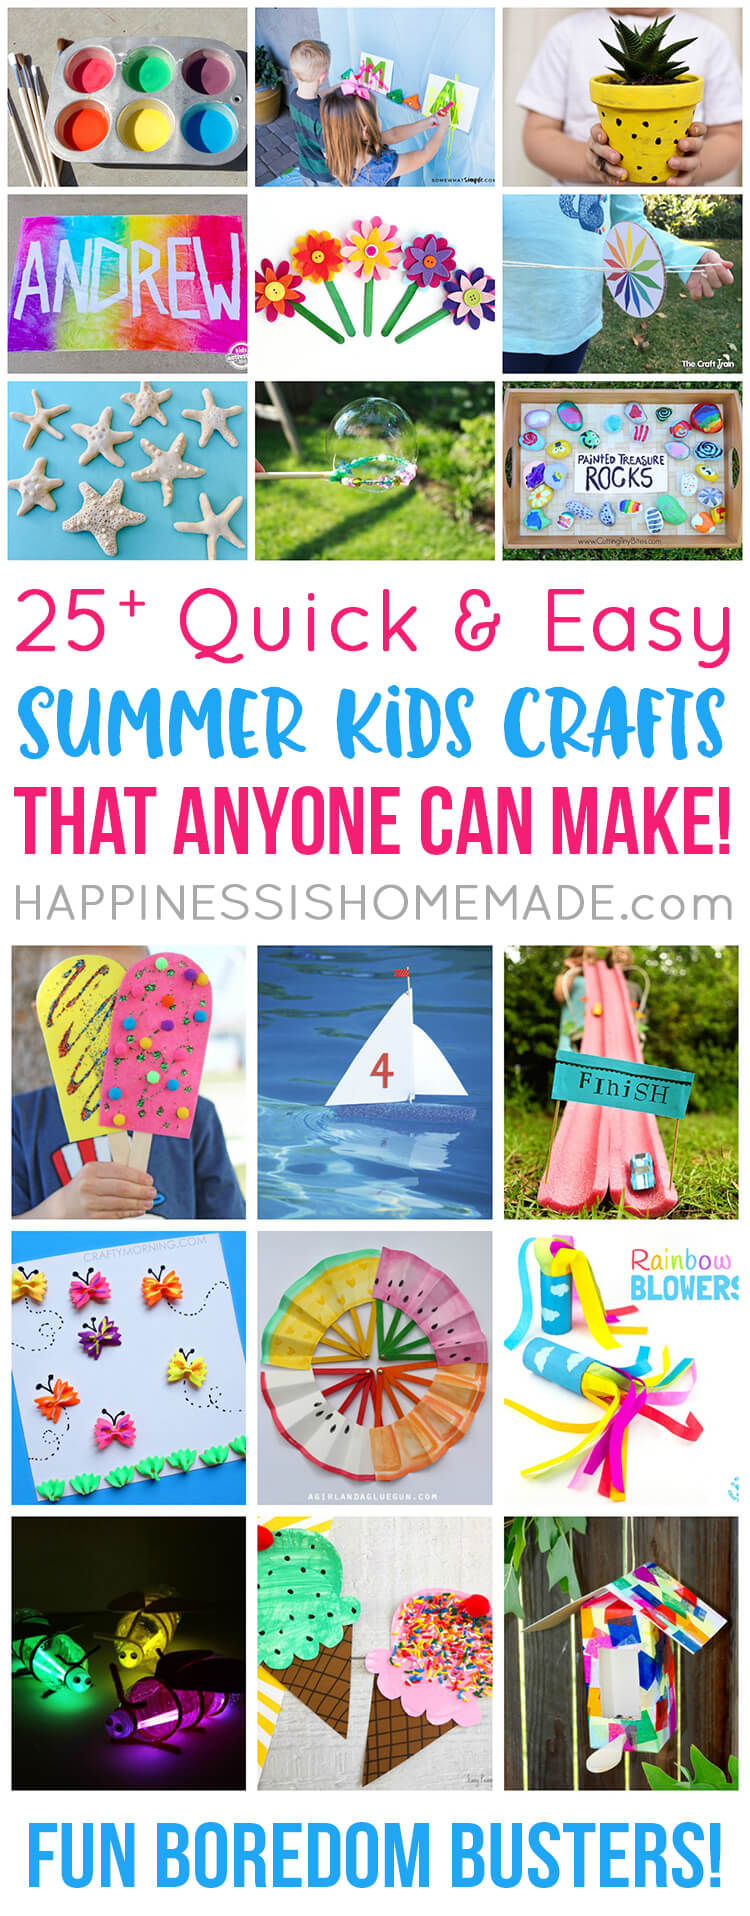 https://www.happinessishomemade.net/wp-content/uploads/2017/06/25-Quick-and-Easy-Summer-Kids-Crafts-That-Anyone-Can-Make.jpg